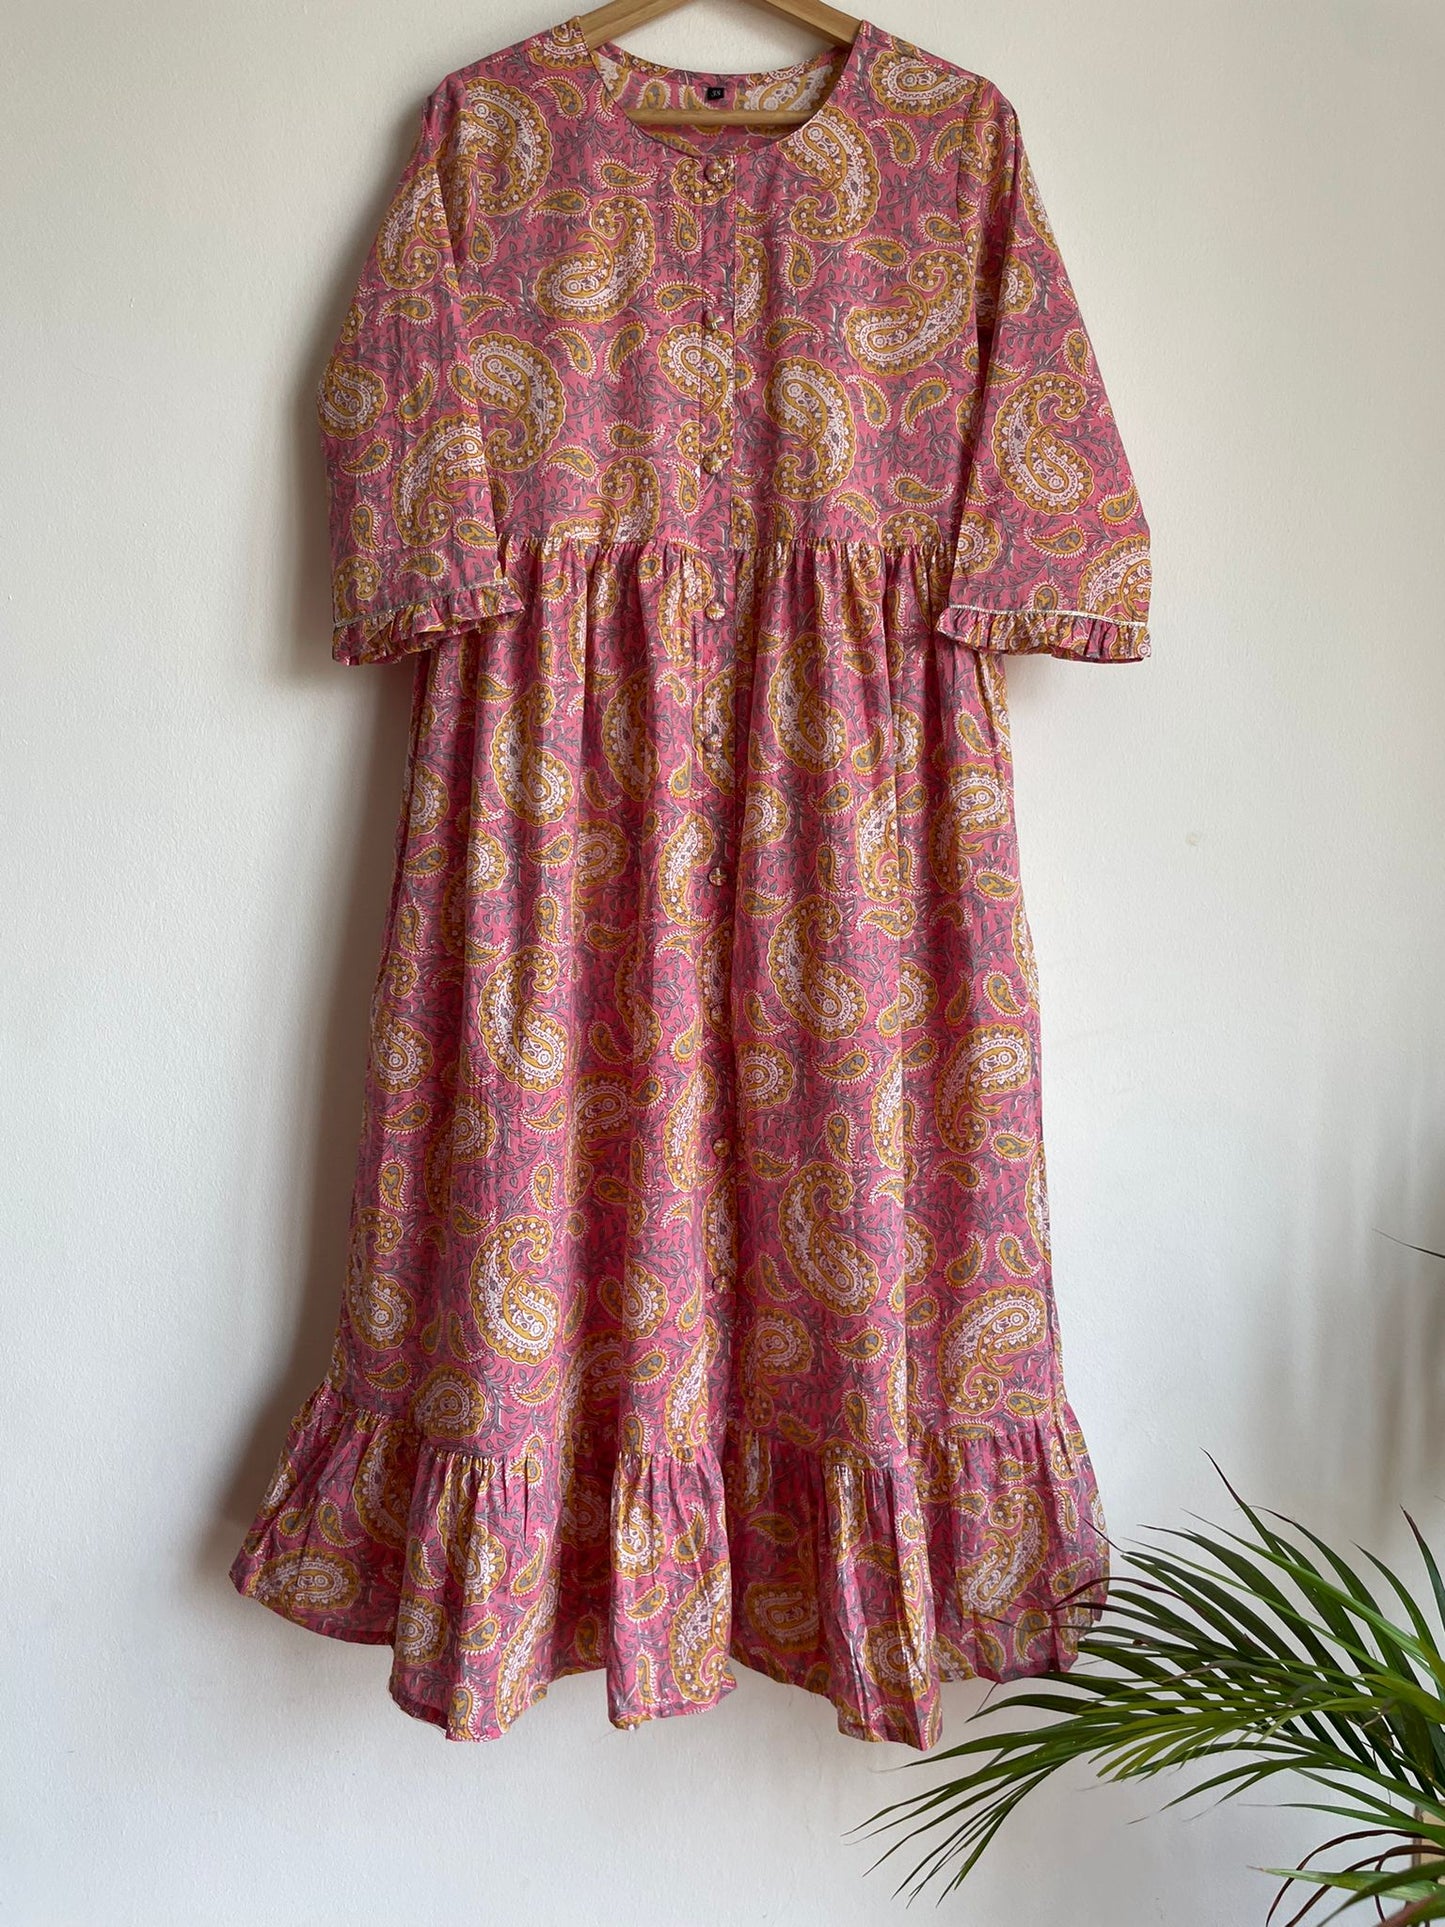 High quality cotton maxi dress for women in singapore that want modest dressing